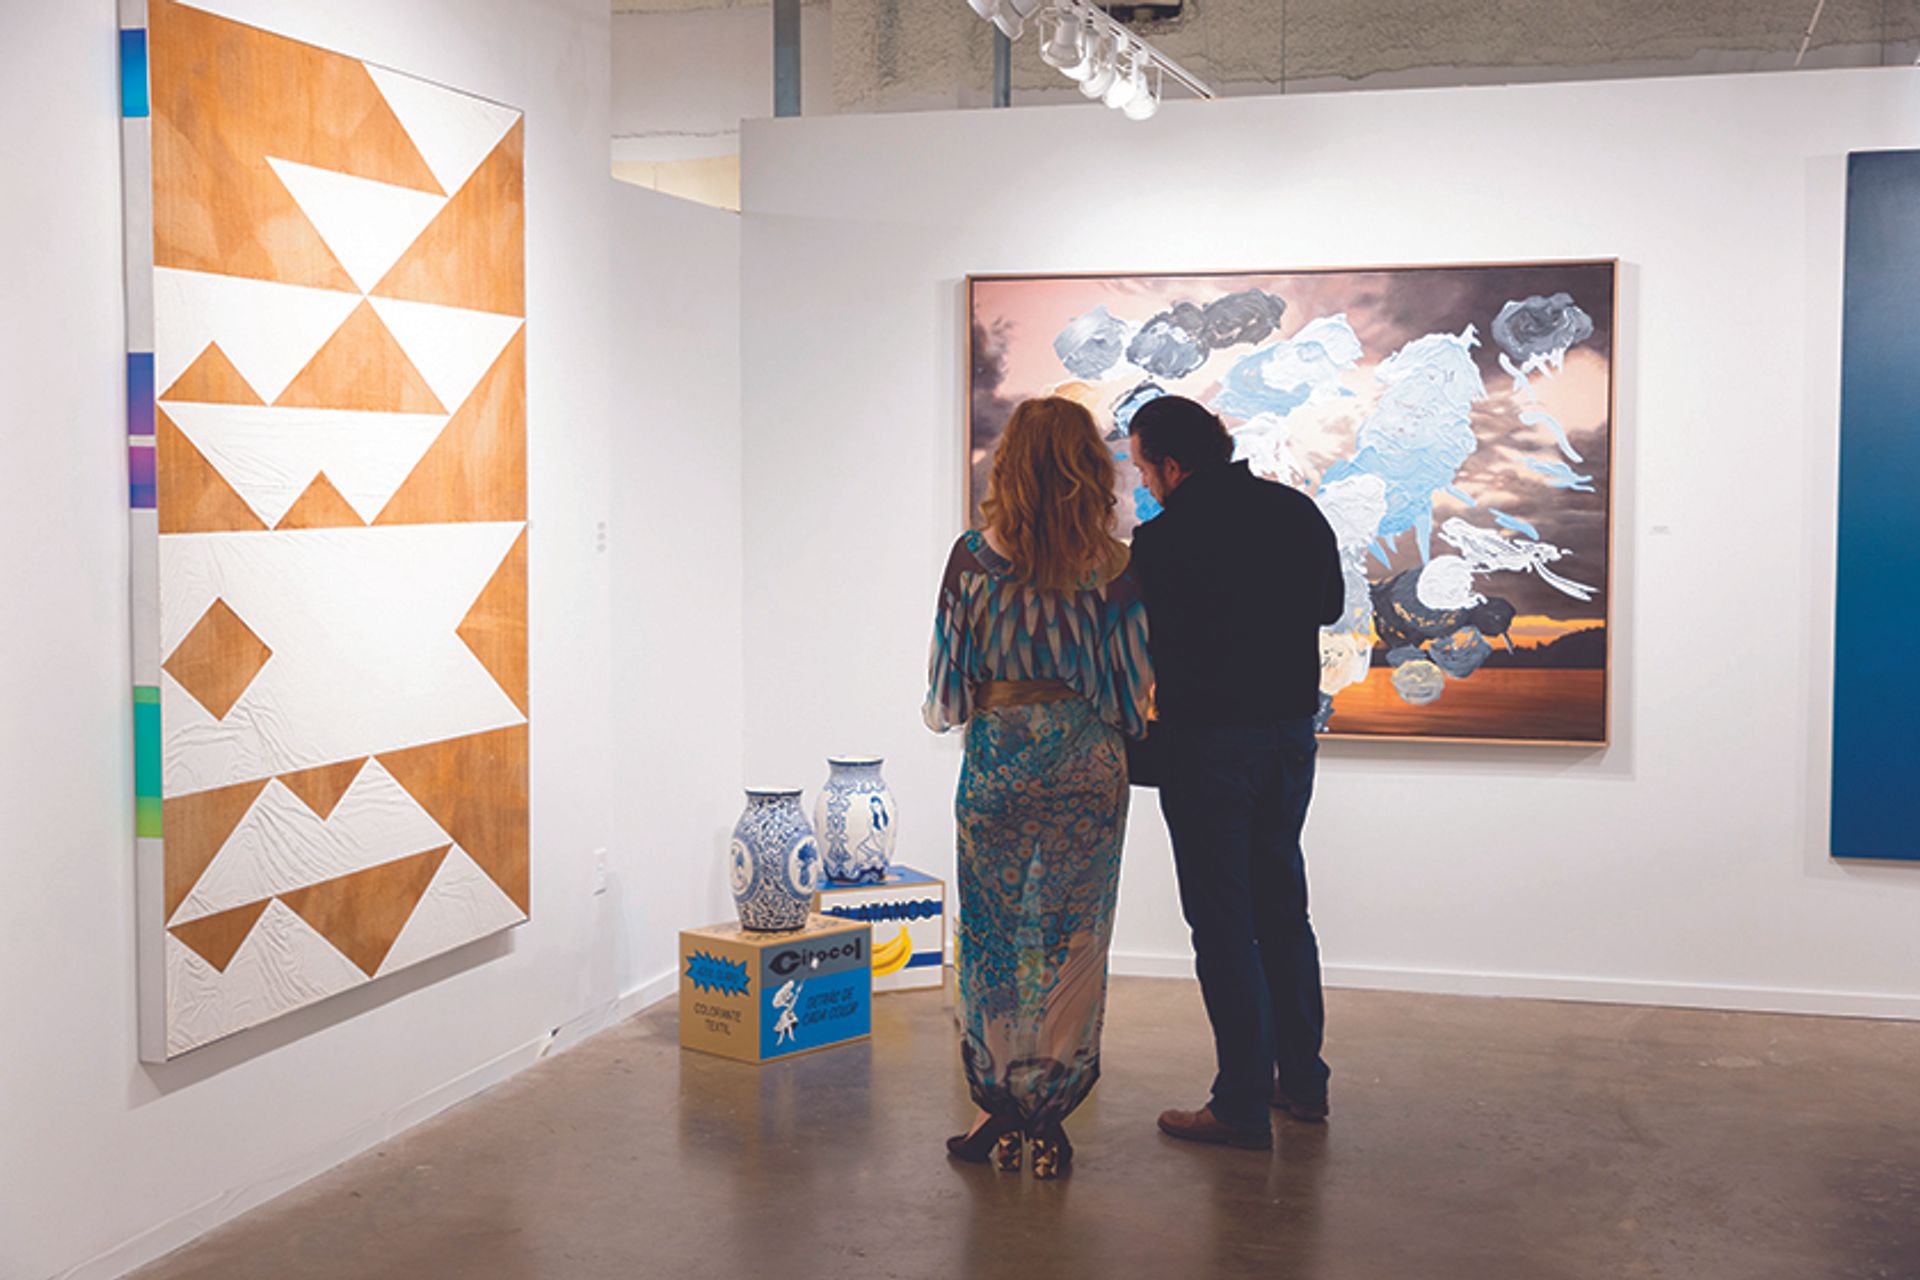 Dallas Art Fair will be joined this year by its first satellite event, the Dallas Invitational Art Fair, featuring around 12 galleriesPhoto: Exploredinary